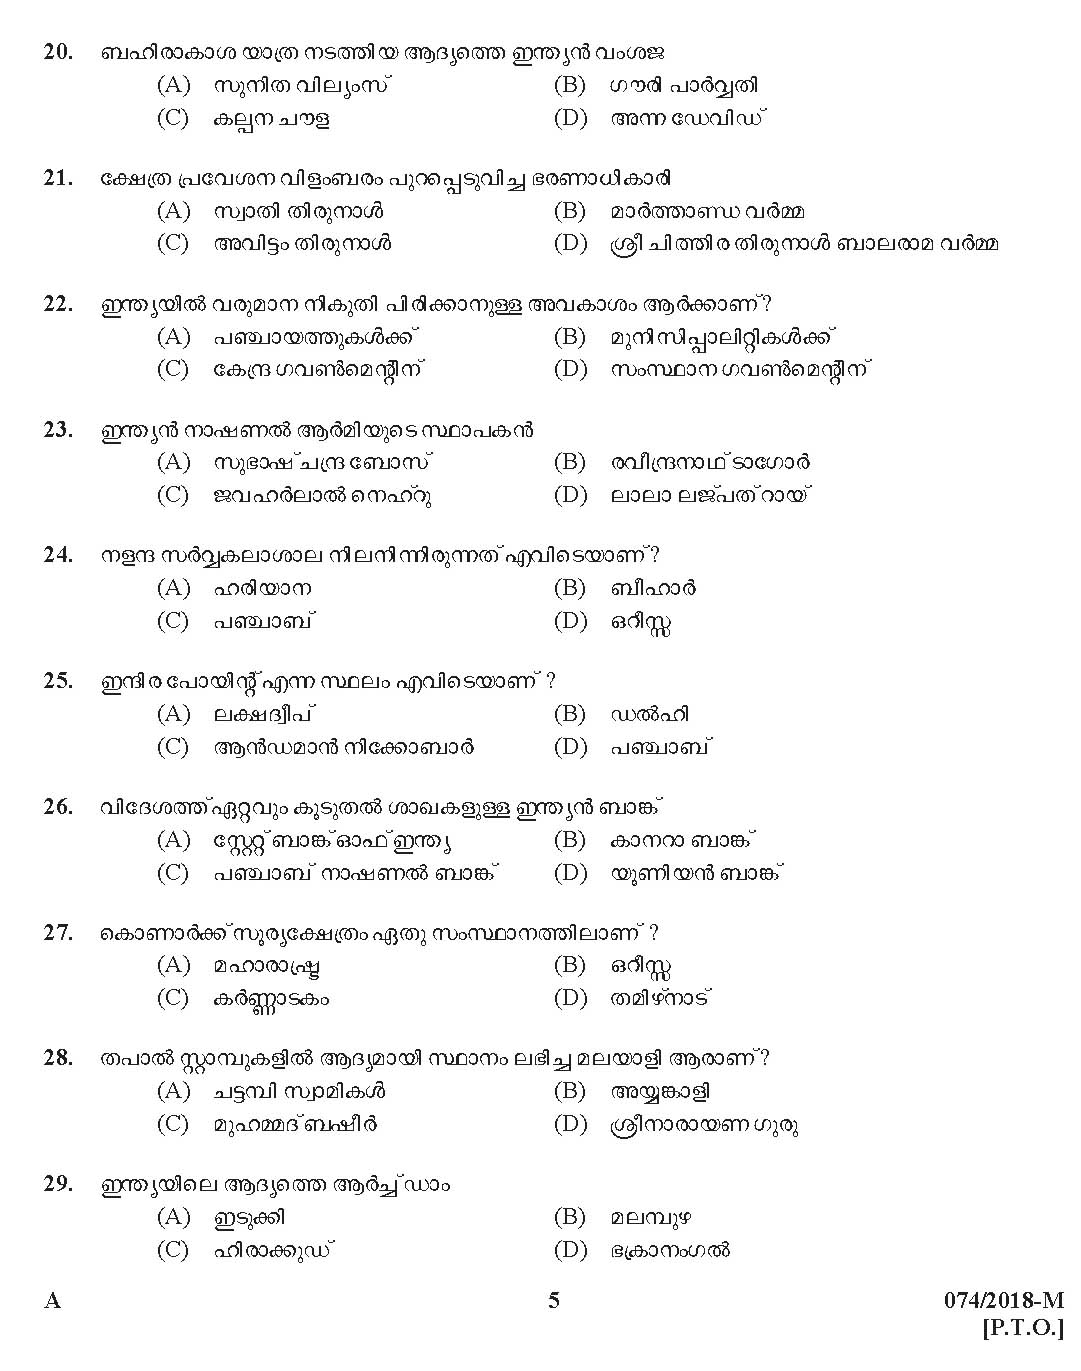 Kerala PSC Police Constable Driver Exam 2018 Question Paper Code 0742018 M 4